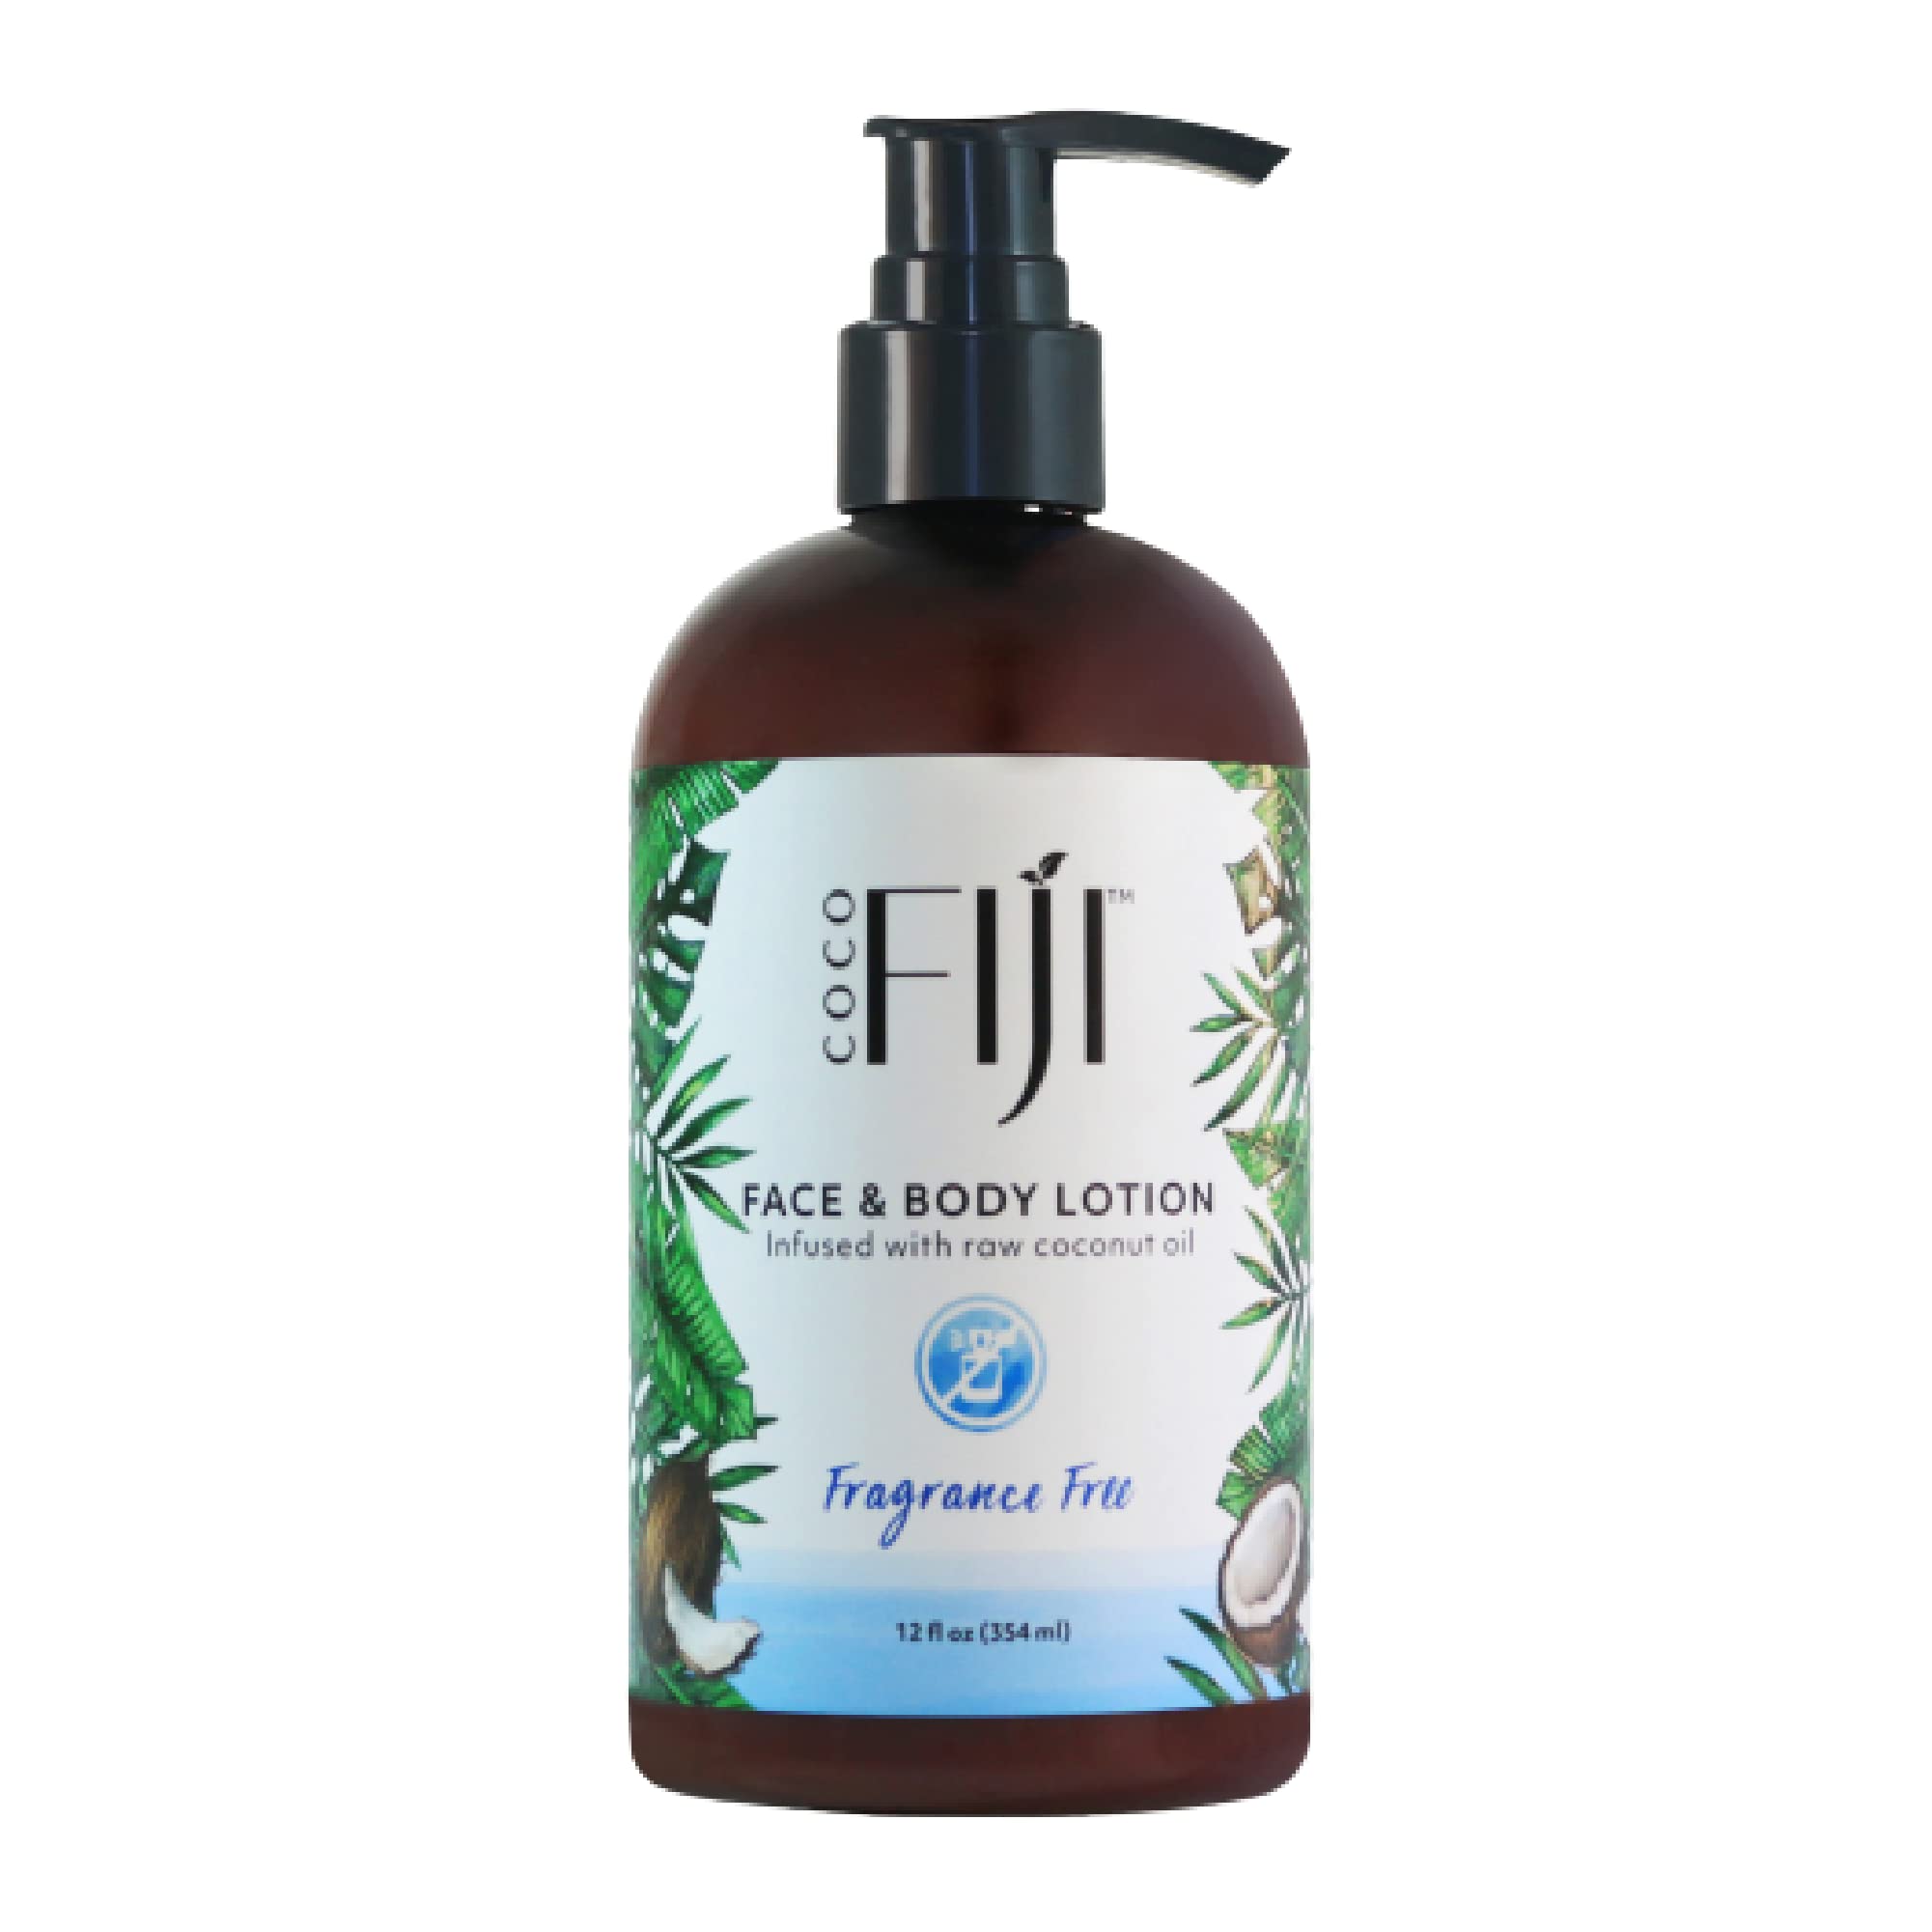 Coco Fiji Face & Body Lotion Infused With Coconut Oil | Lotion for Dry Skin | Moisturizer Face Cream & Massage Lotion for Women & Men | Fragrance Free 12 oz, Pack of 1